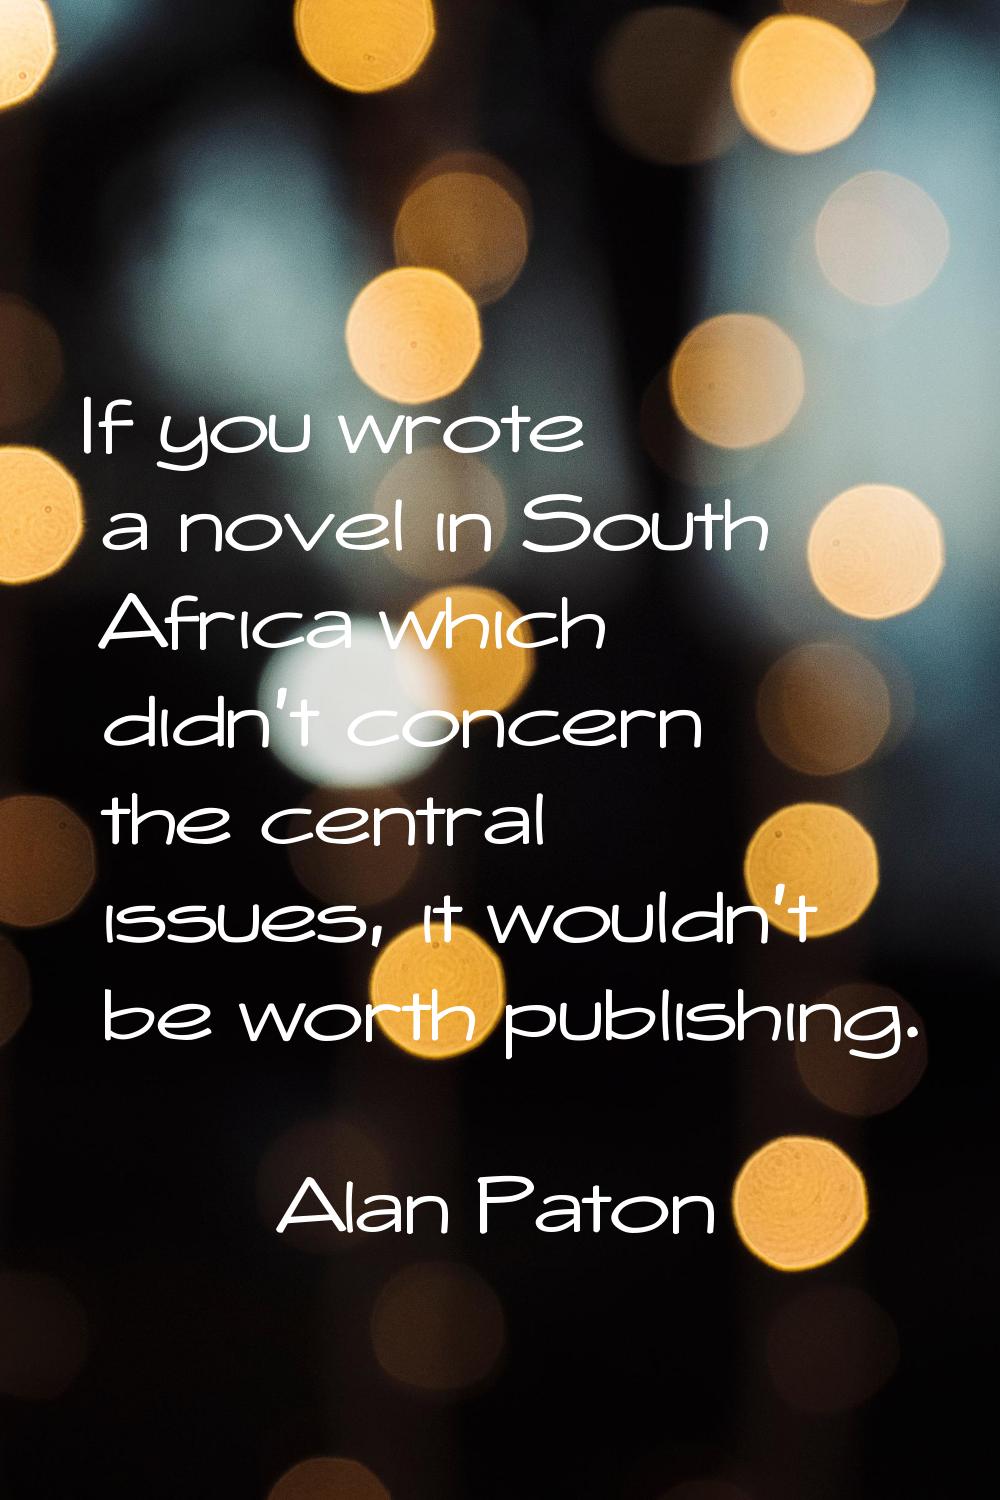 If you wrote a novel in South Africa which didn't concern the central issues, it wouldn't be worth 